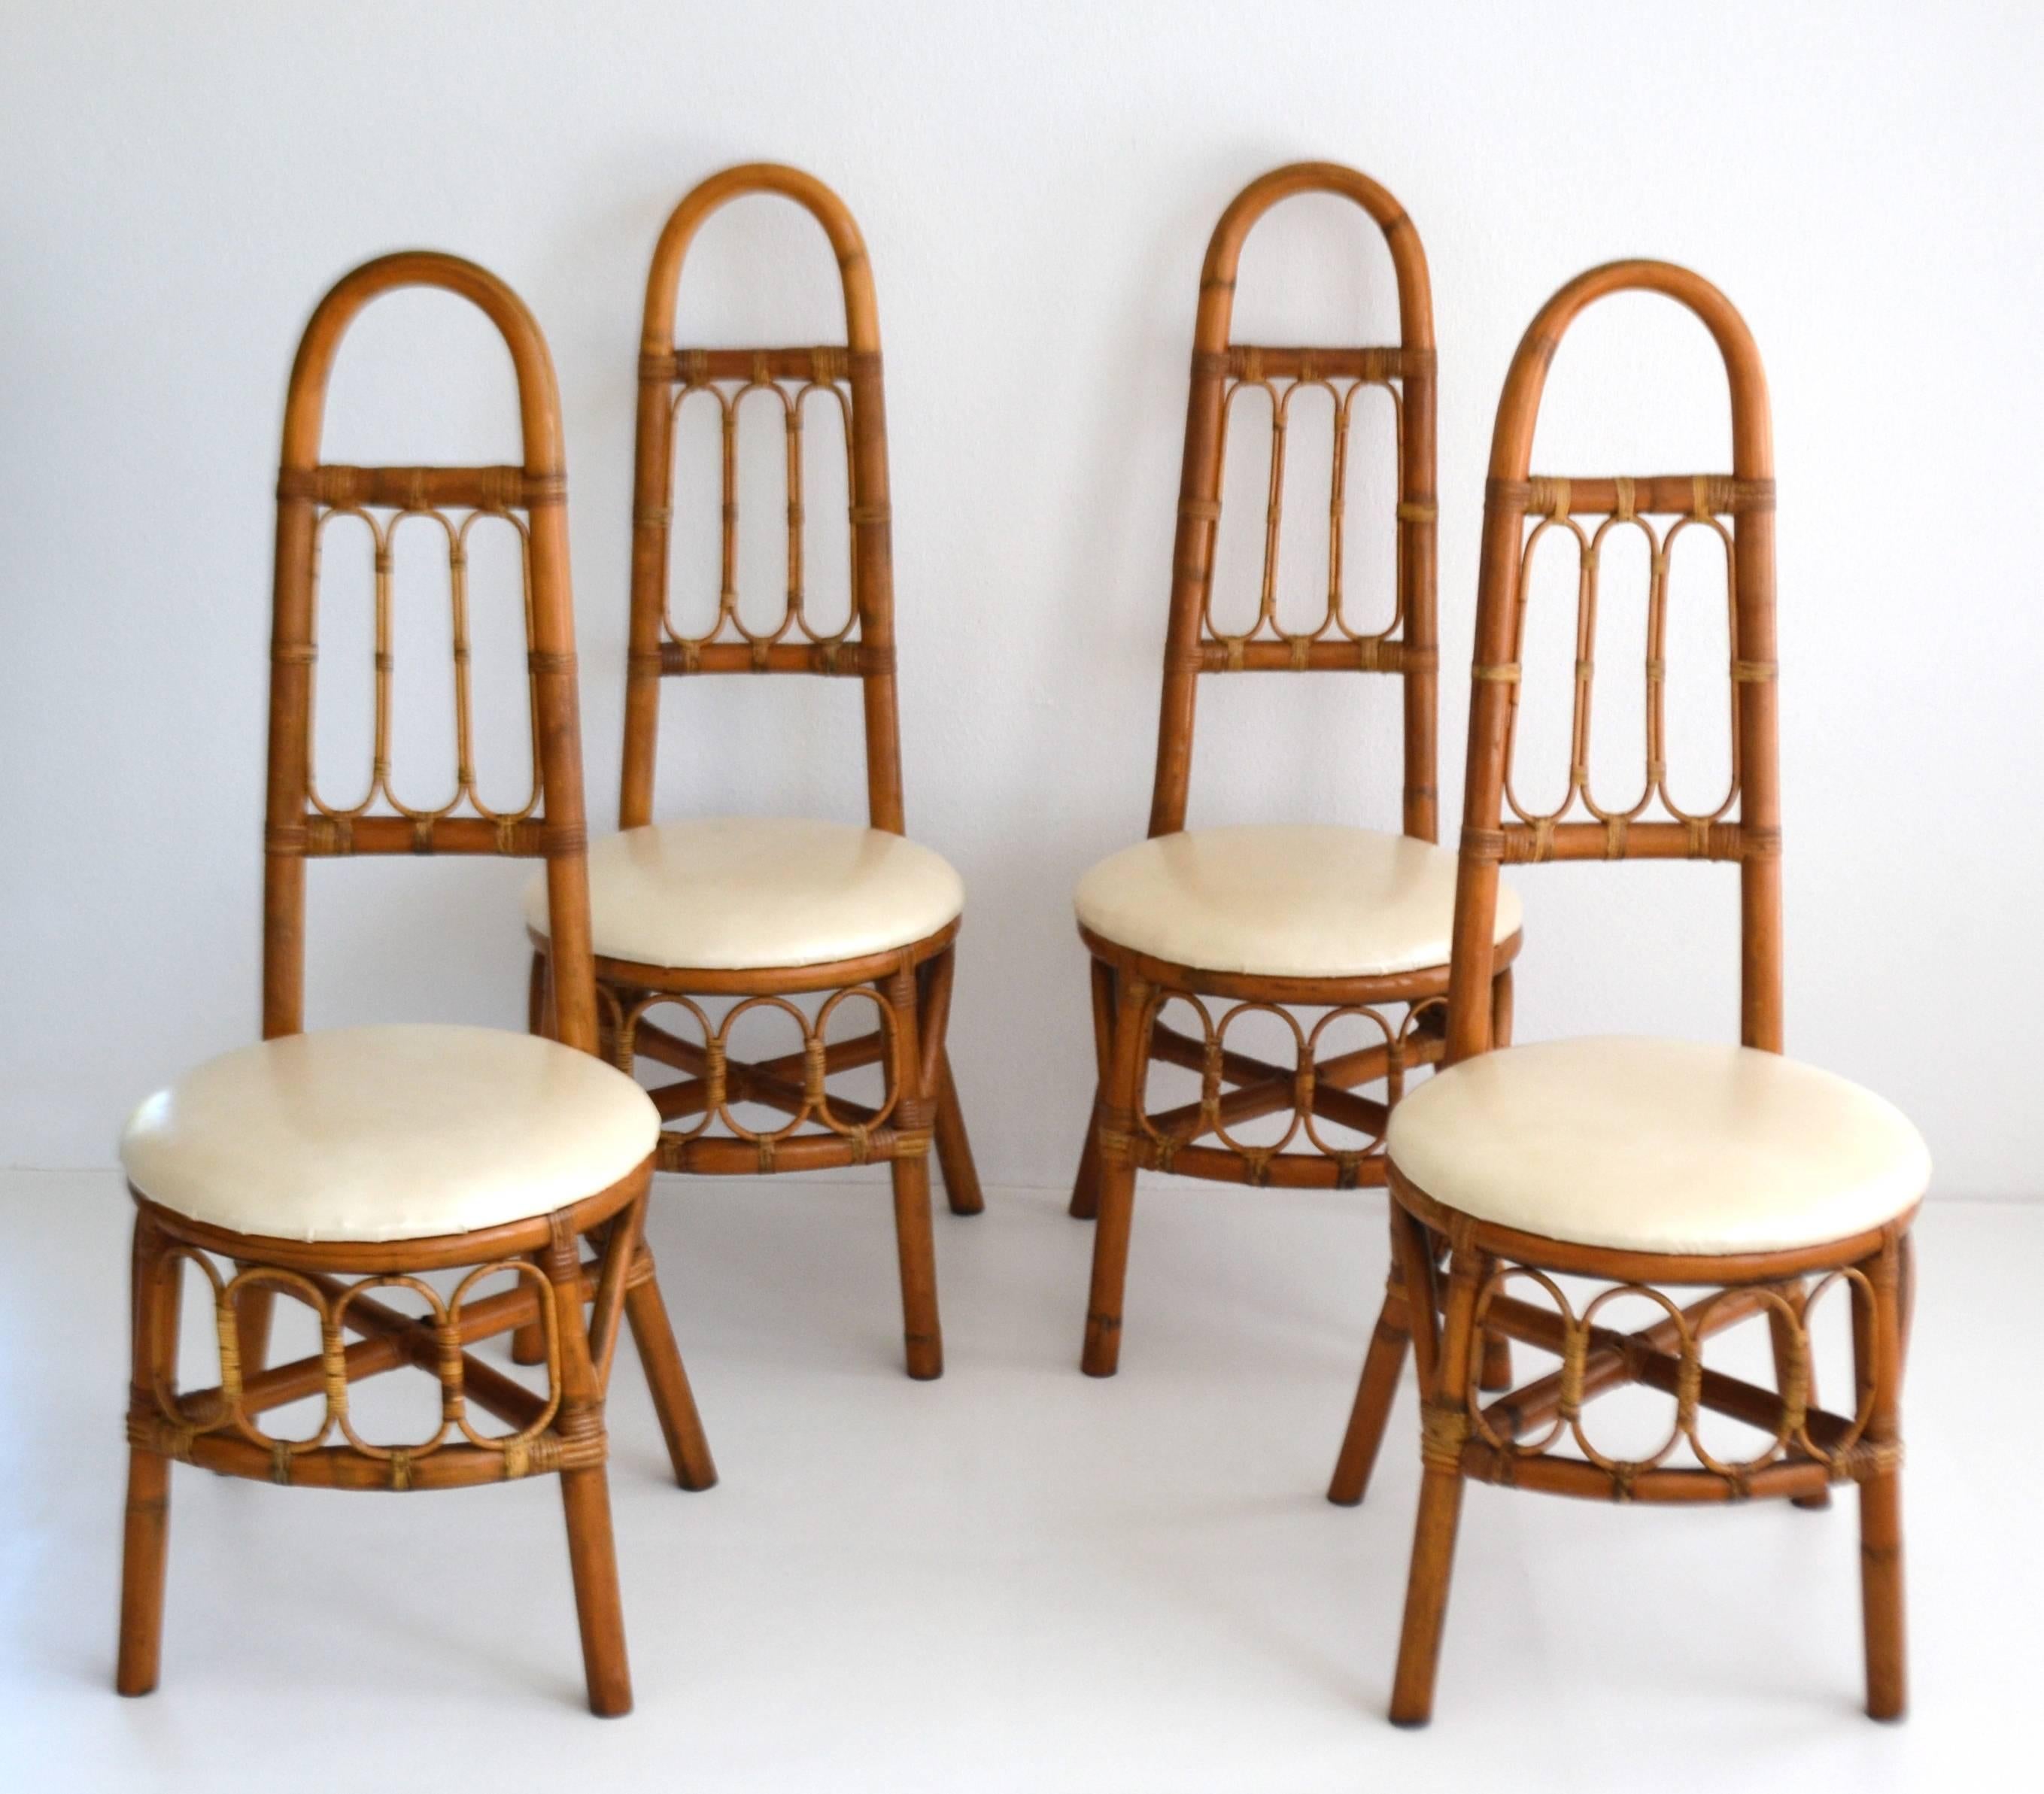 Striking set of four midcentury bent bamboo high back game table chairs, circa 1950s-1960s. These sculptural side chairs/hall chairs are in original excellent condition with a wonderful honey glazed aged patina.